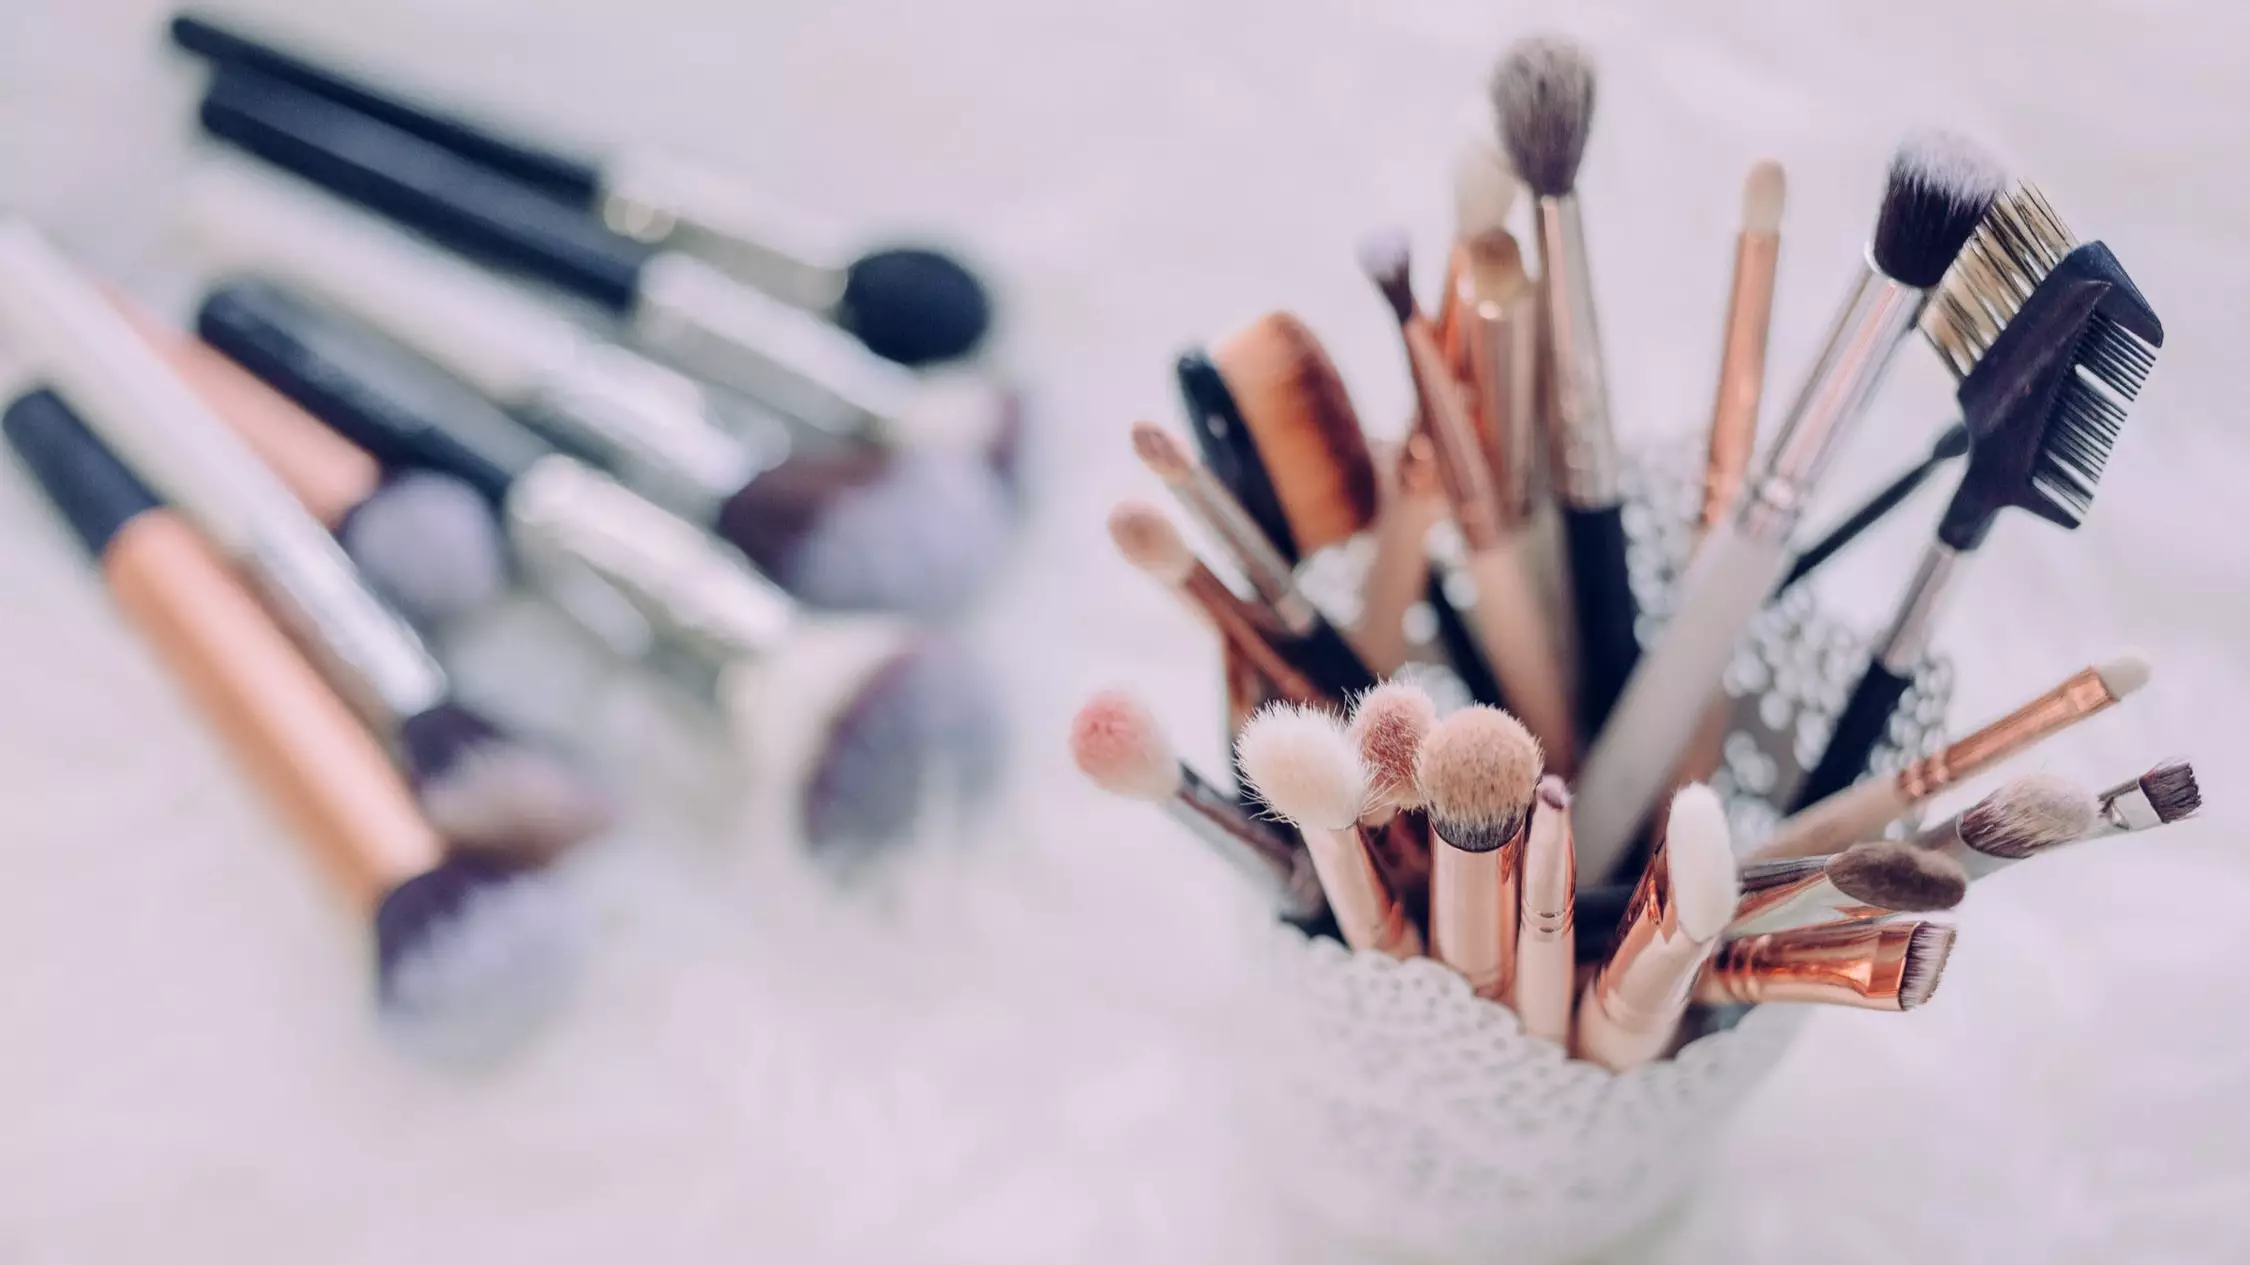 ​Woman Shows The Danger Of Not Washing Your Makeup Brushes In Viral Post